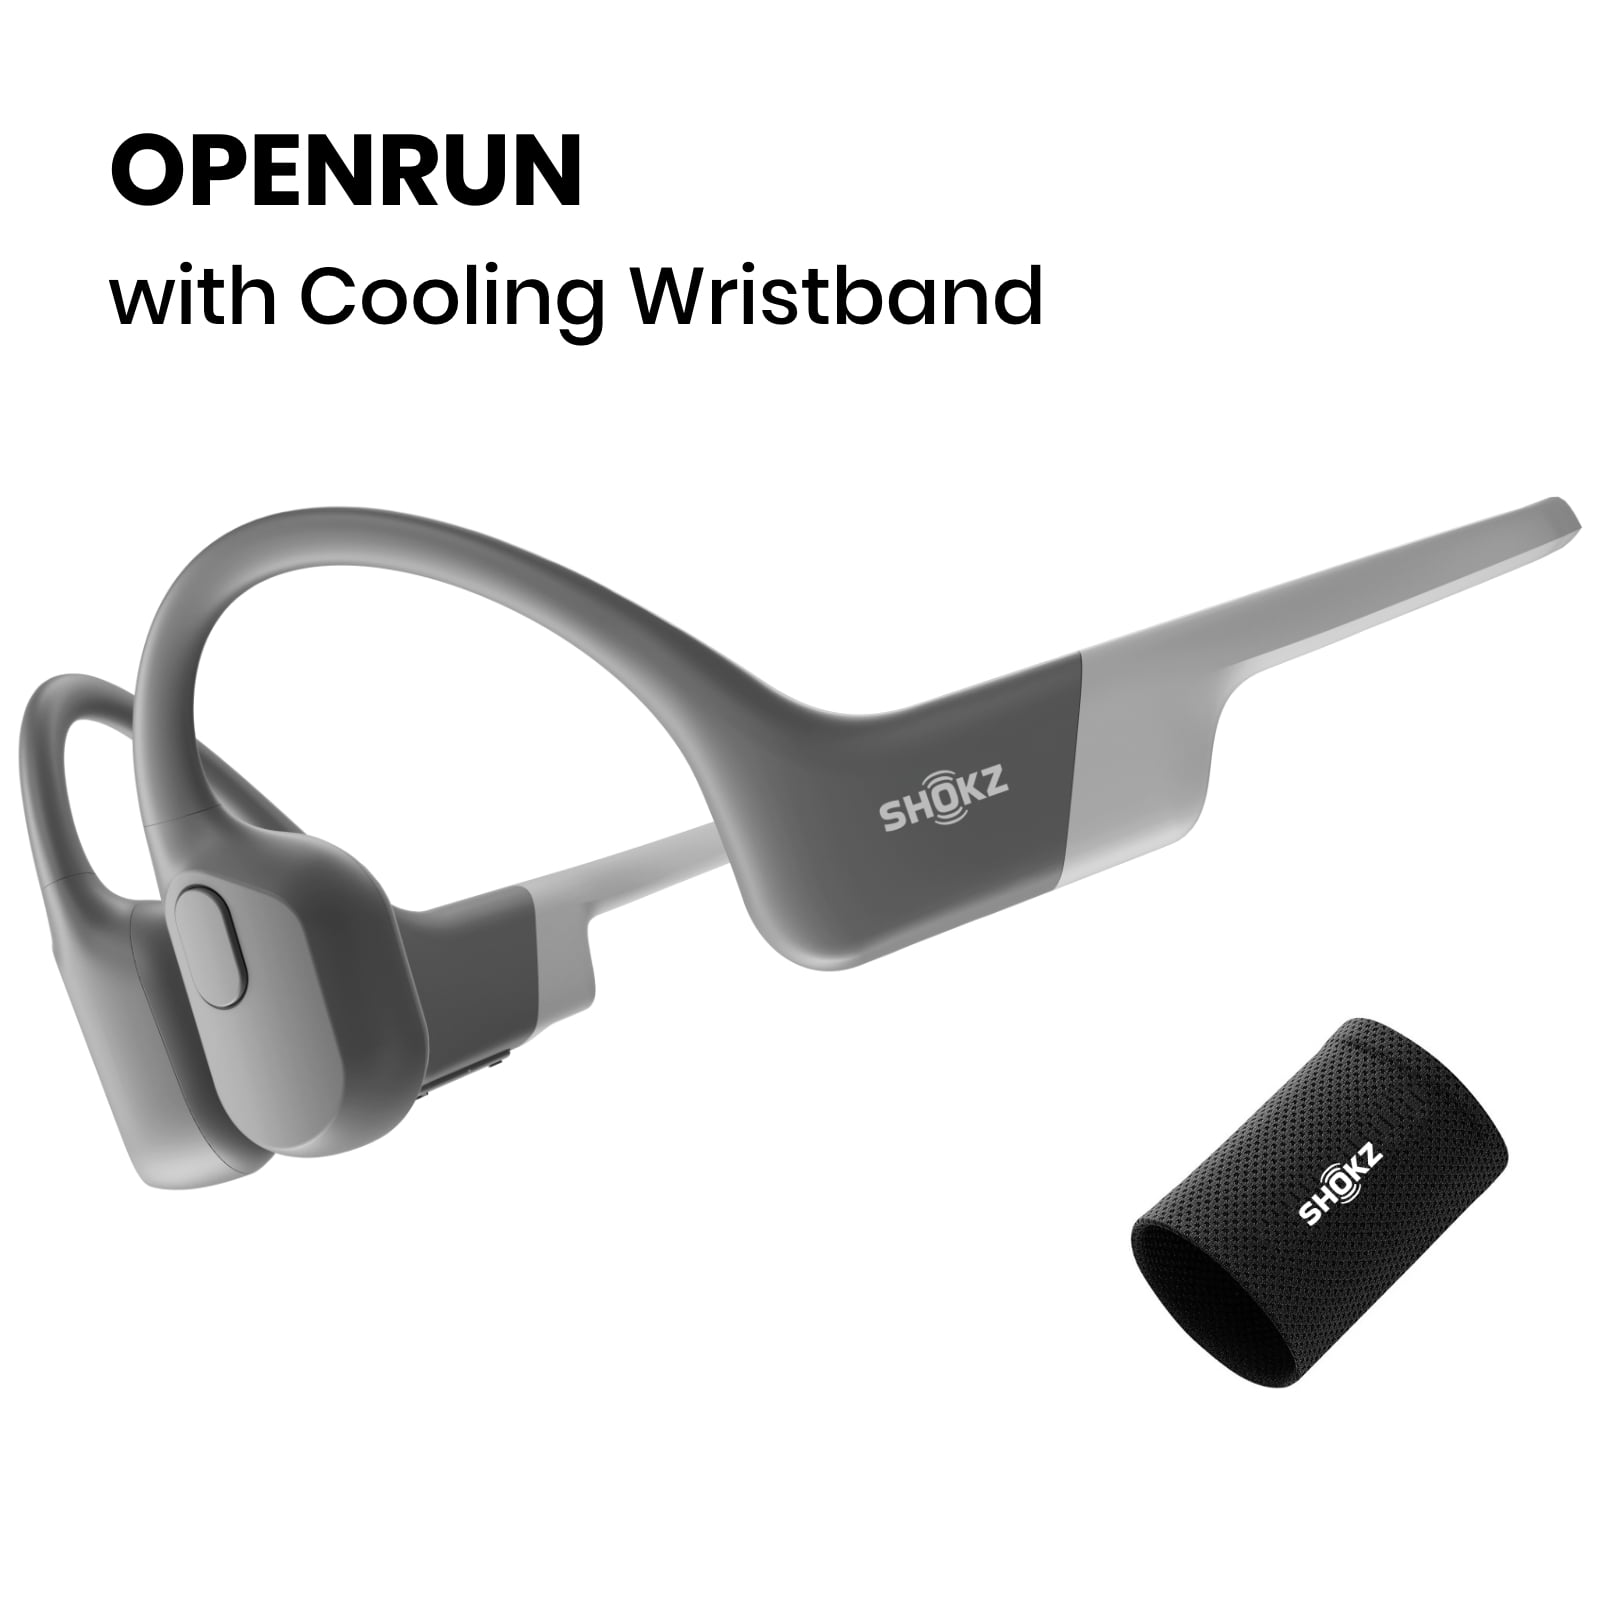 Shokz OpenRun Bone Conduction Waterproof Bluetooth Headphones for Sports  with Cooling Wristband (Formerly Aeropex), Grey